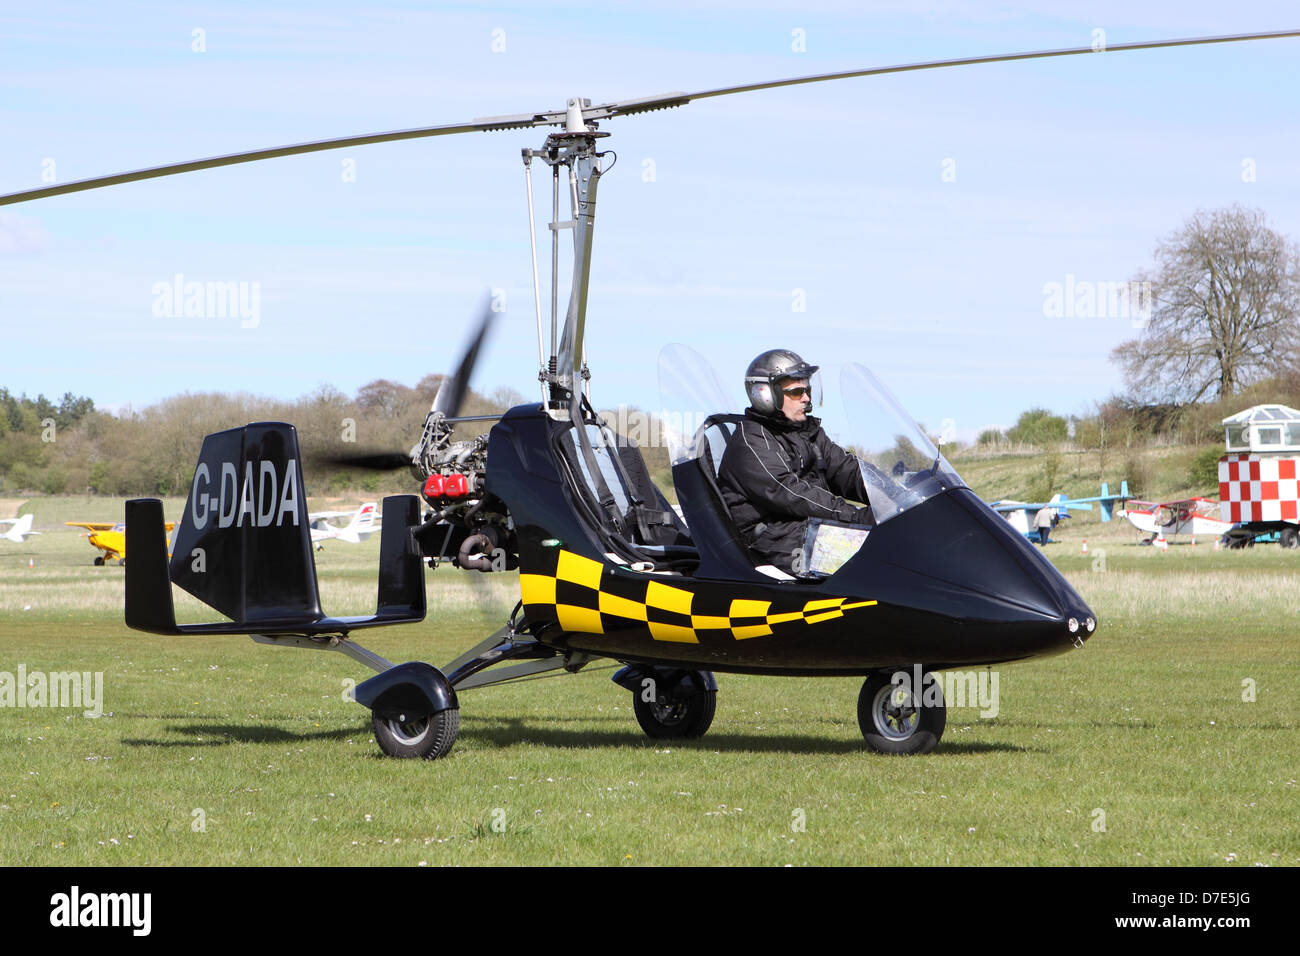 Gyrocopter Auto-Gyro MT-03 gyro taxying at Popham airfield pilot with crash helmet Stock Photo